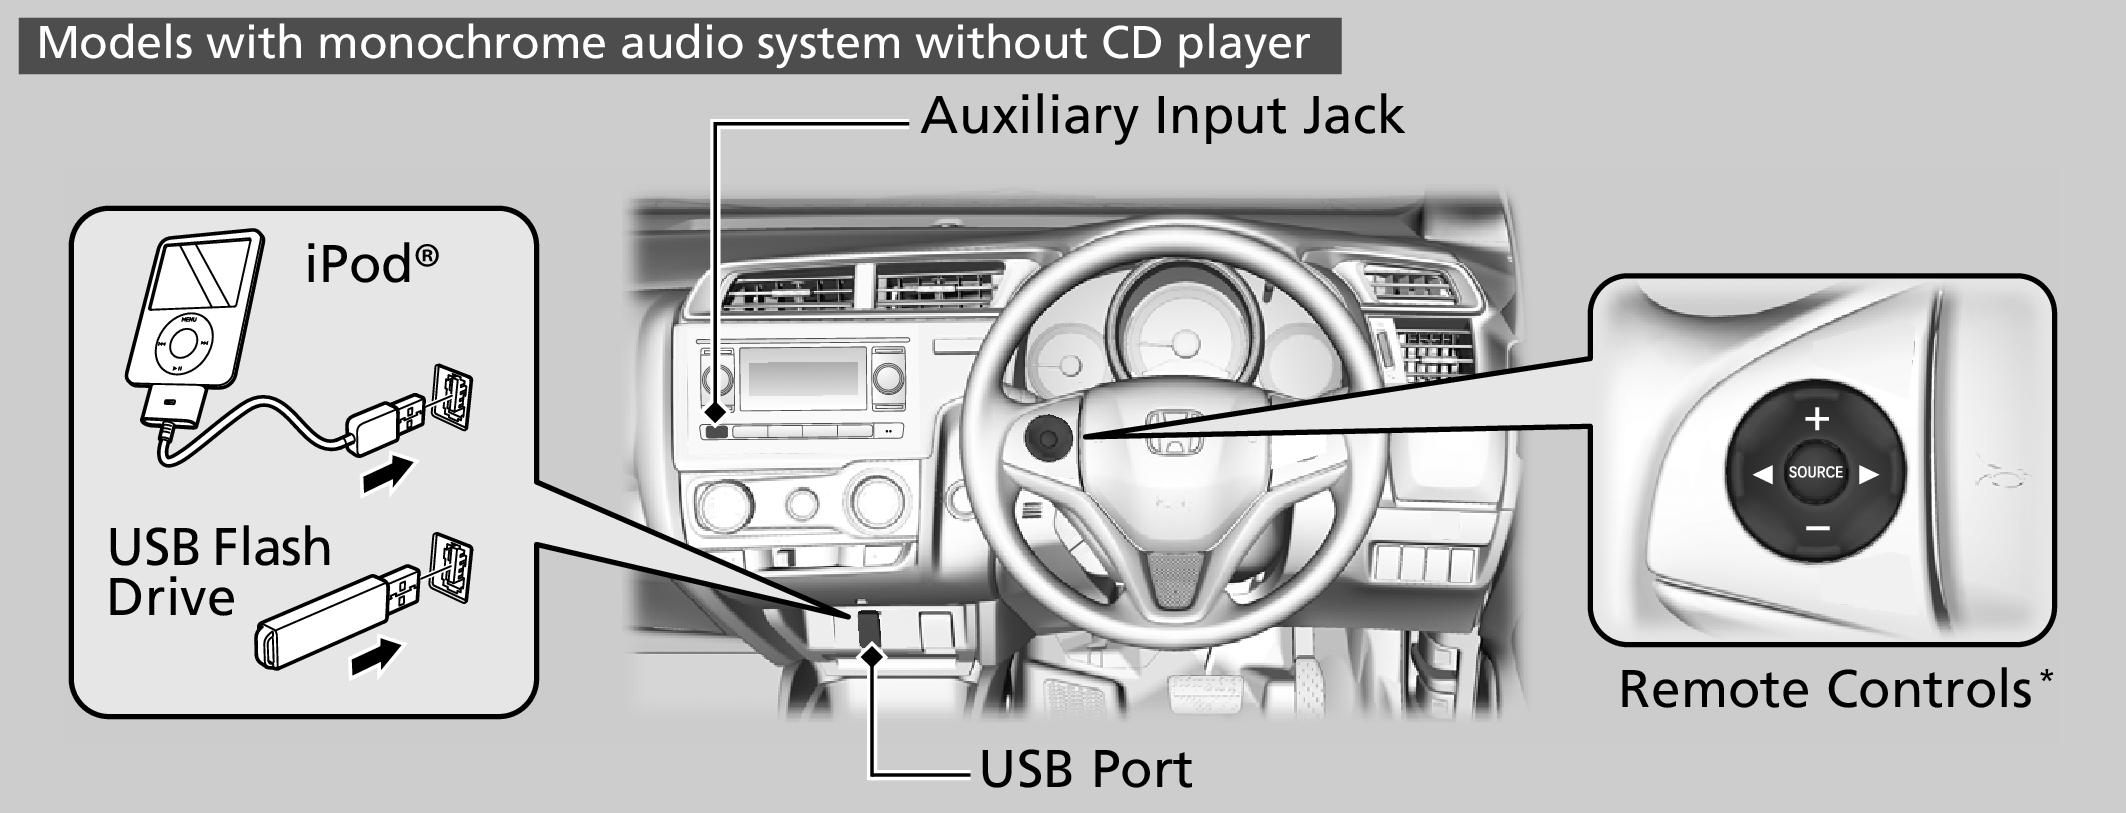 Honda Jazz Audio System without CD Player